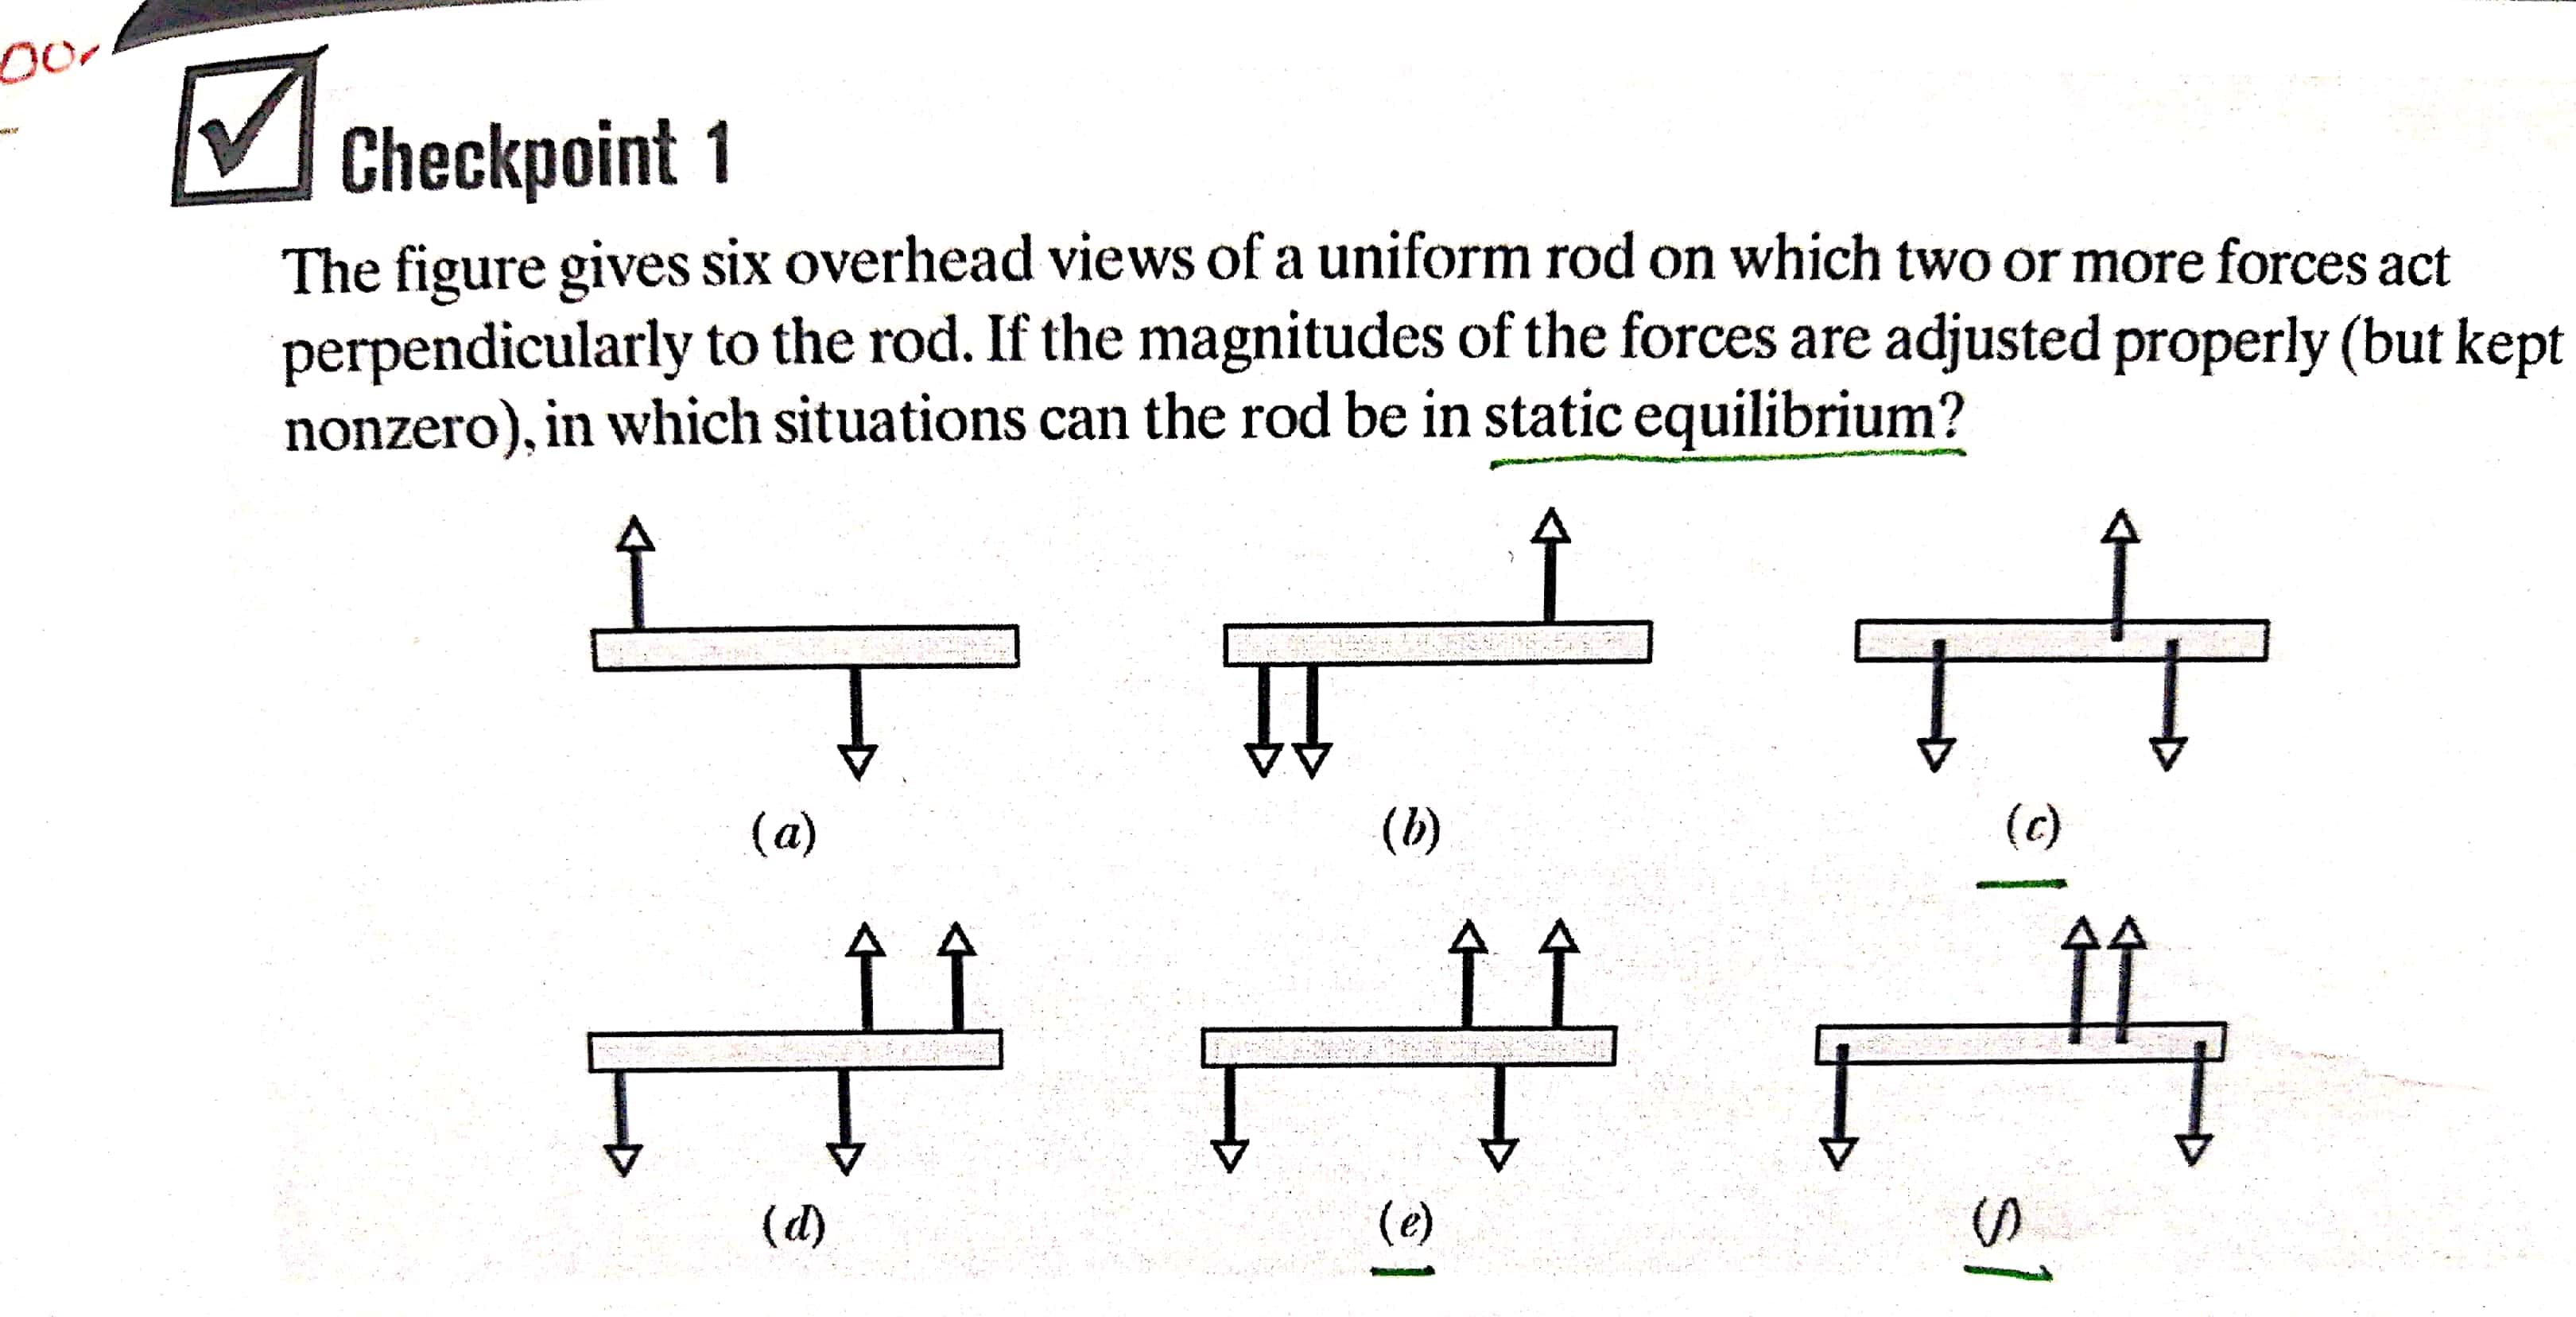 The figure gives six overhead views of a uniform rod on which two or more forces act
perpendicularly to the rod. If the magnitudes of the forces are adjusted properly (but kept
nonzero), in which situations can the rod be in static equilibrium?
(a)
(b)
(c)
(d)
(e)
